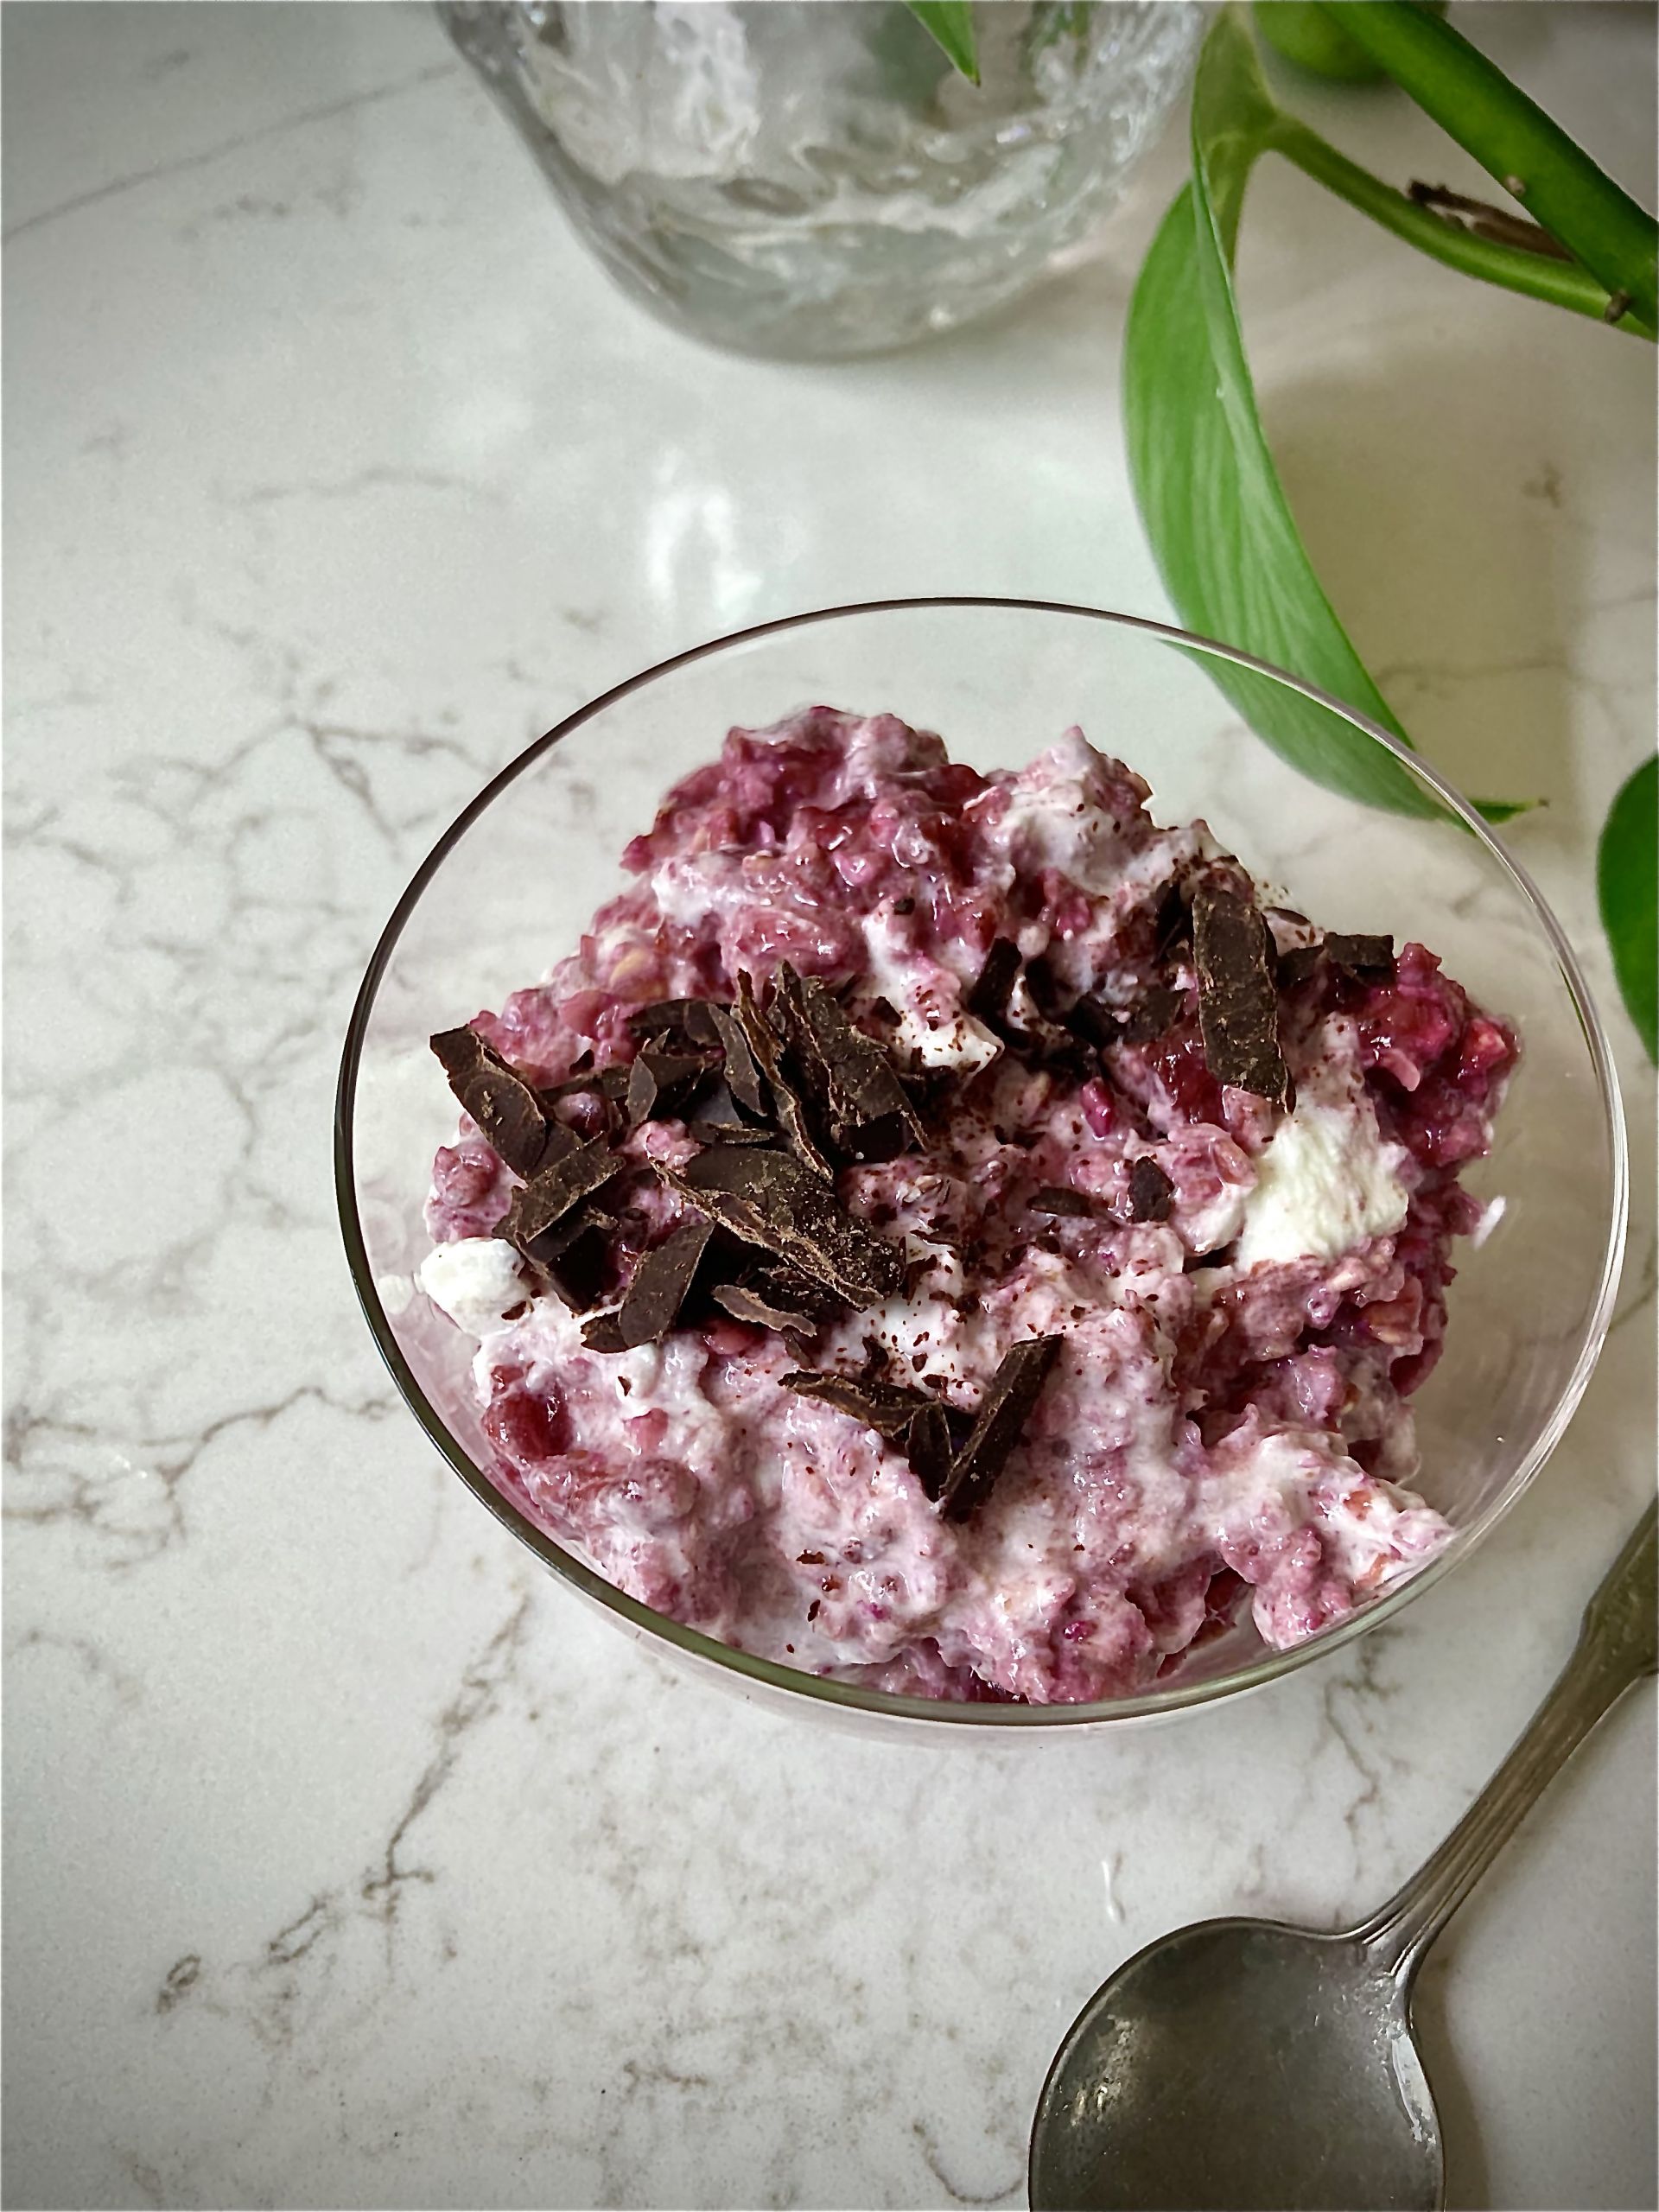 Plum Overnight Oats ⋆ Easy Chilled Overnight Oats with Plums!